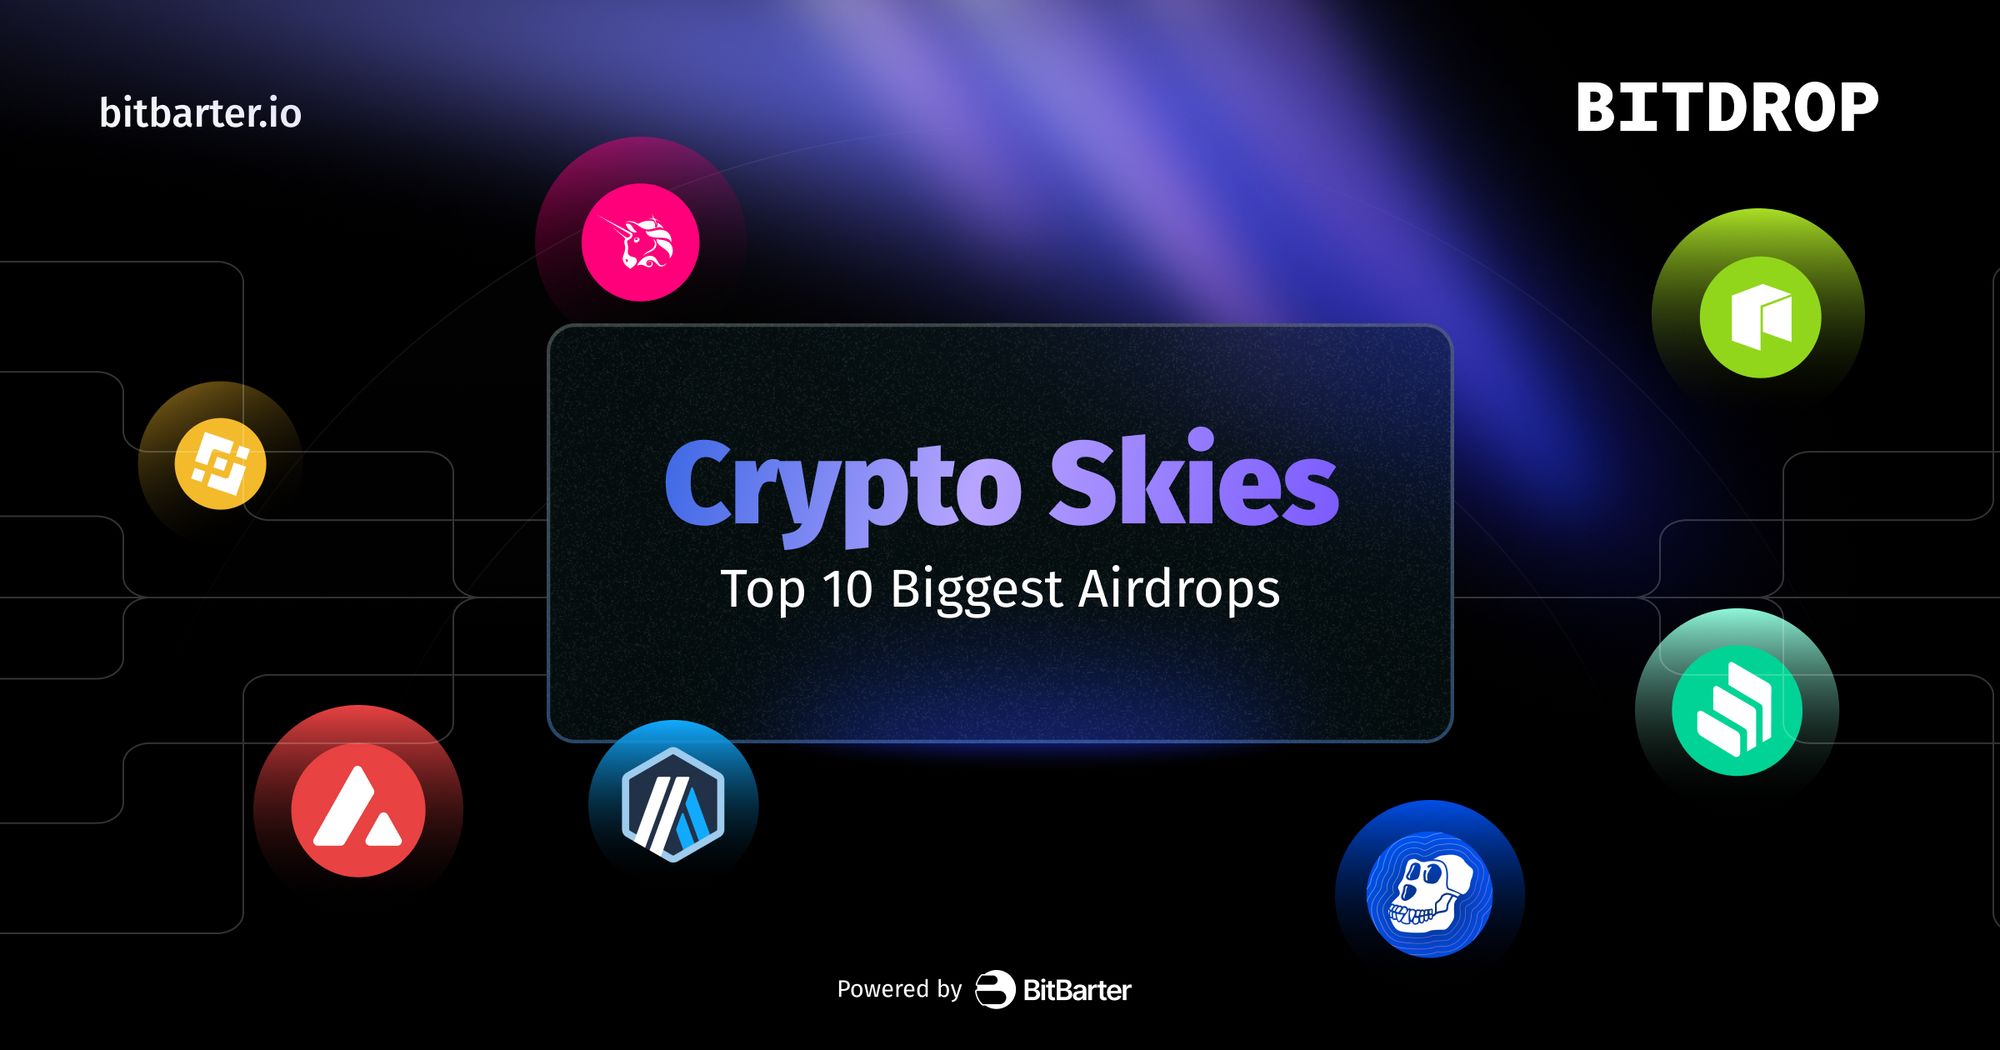 The Crypto Skies: Top 10 Biggest Airdrops